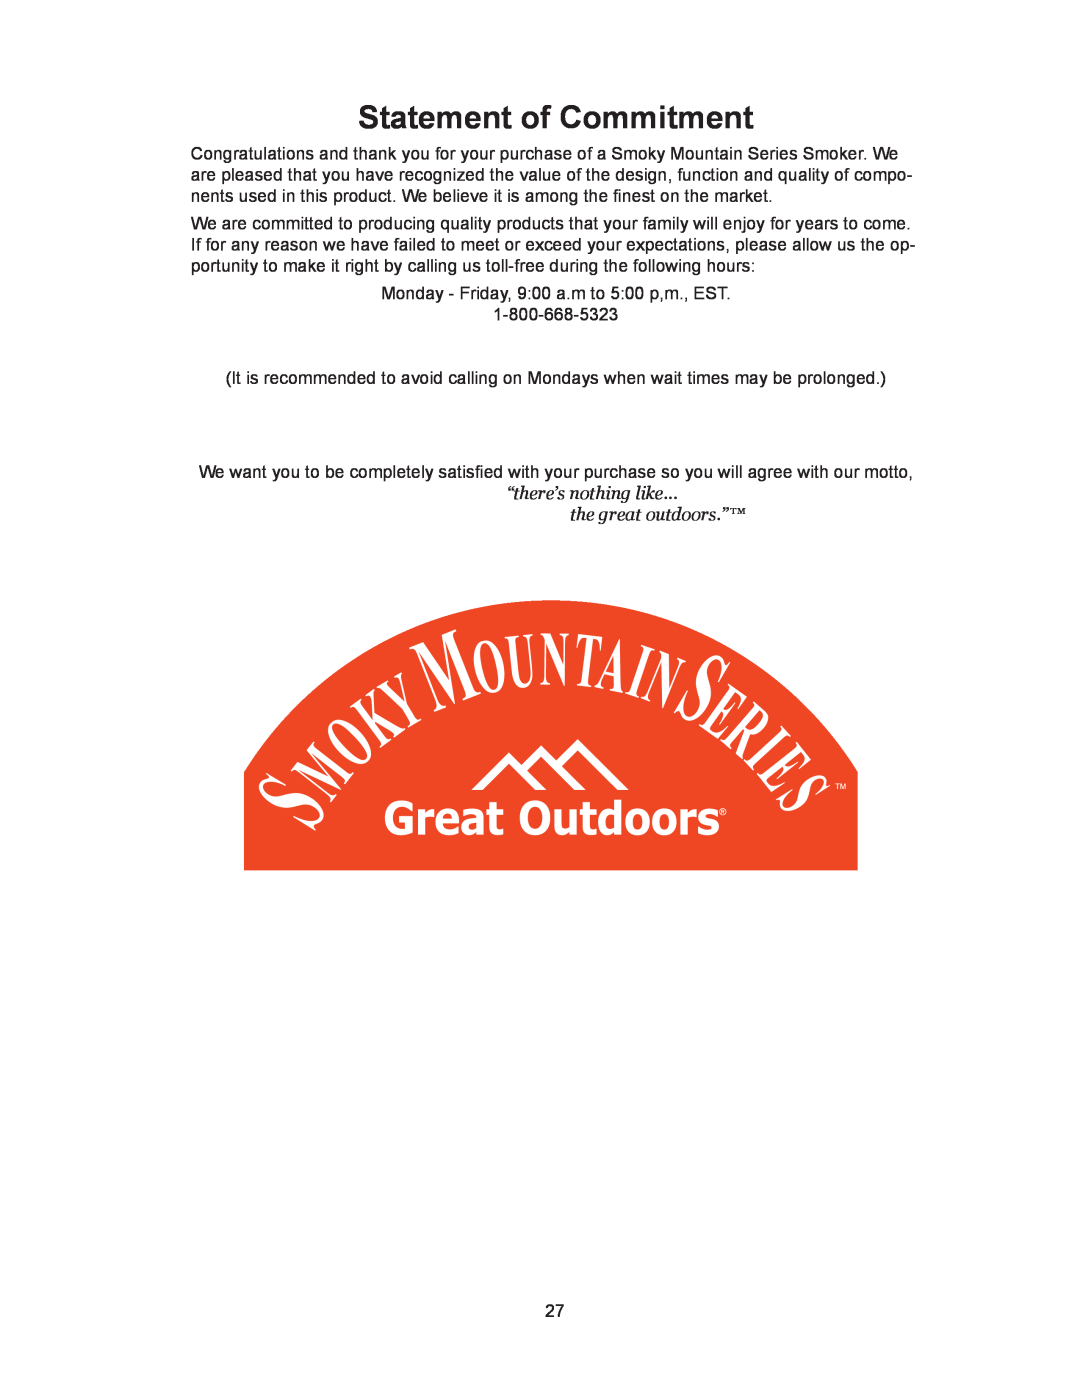 CFM Corporation 3405BG owner manual Statement of Commitment, “there’s nothing like the great outdoors.” 